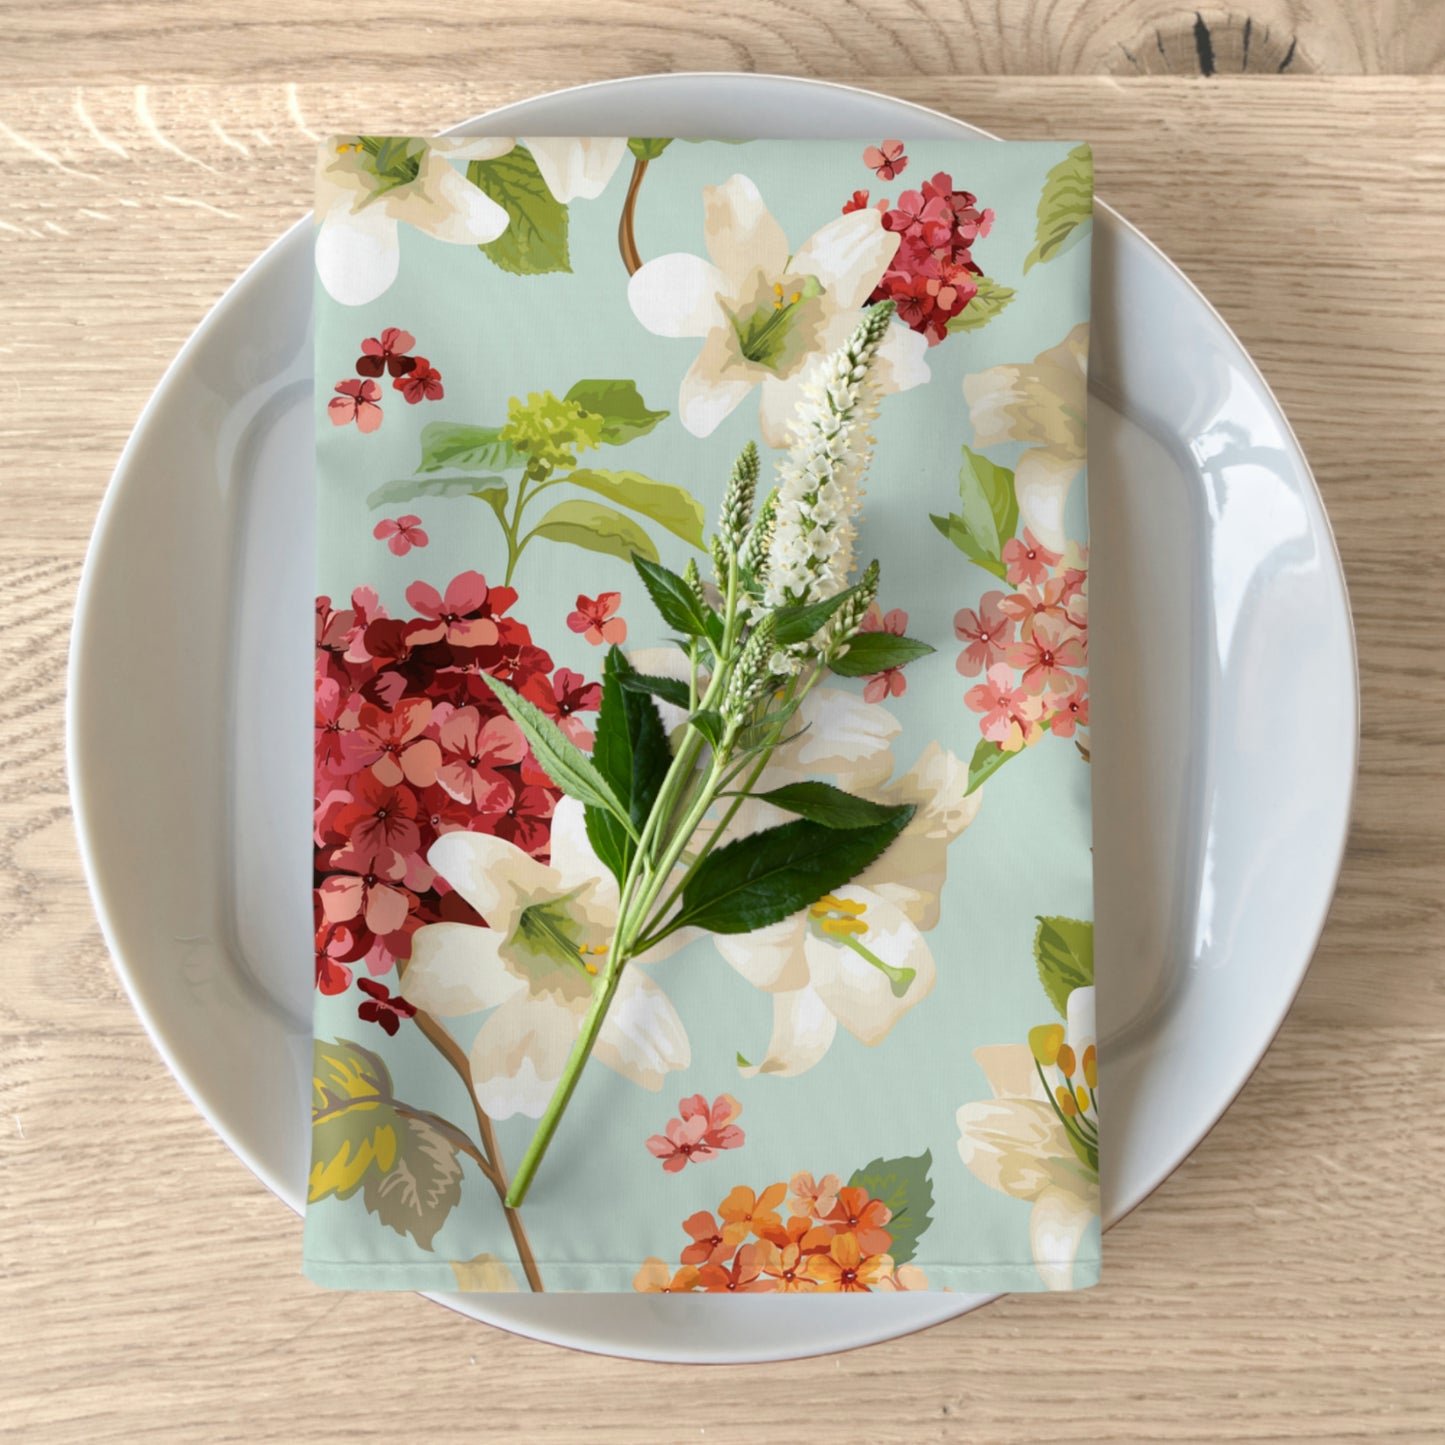 Autumn Hortensia and Lily Flowers Set of 4 Napkins. Floral Shabby Chic Thanksgiving Day Table Setting